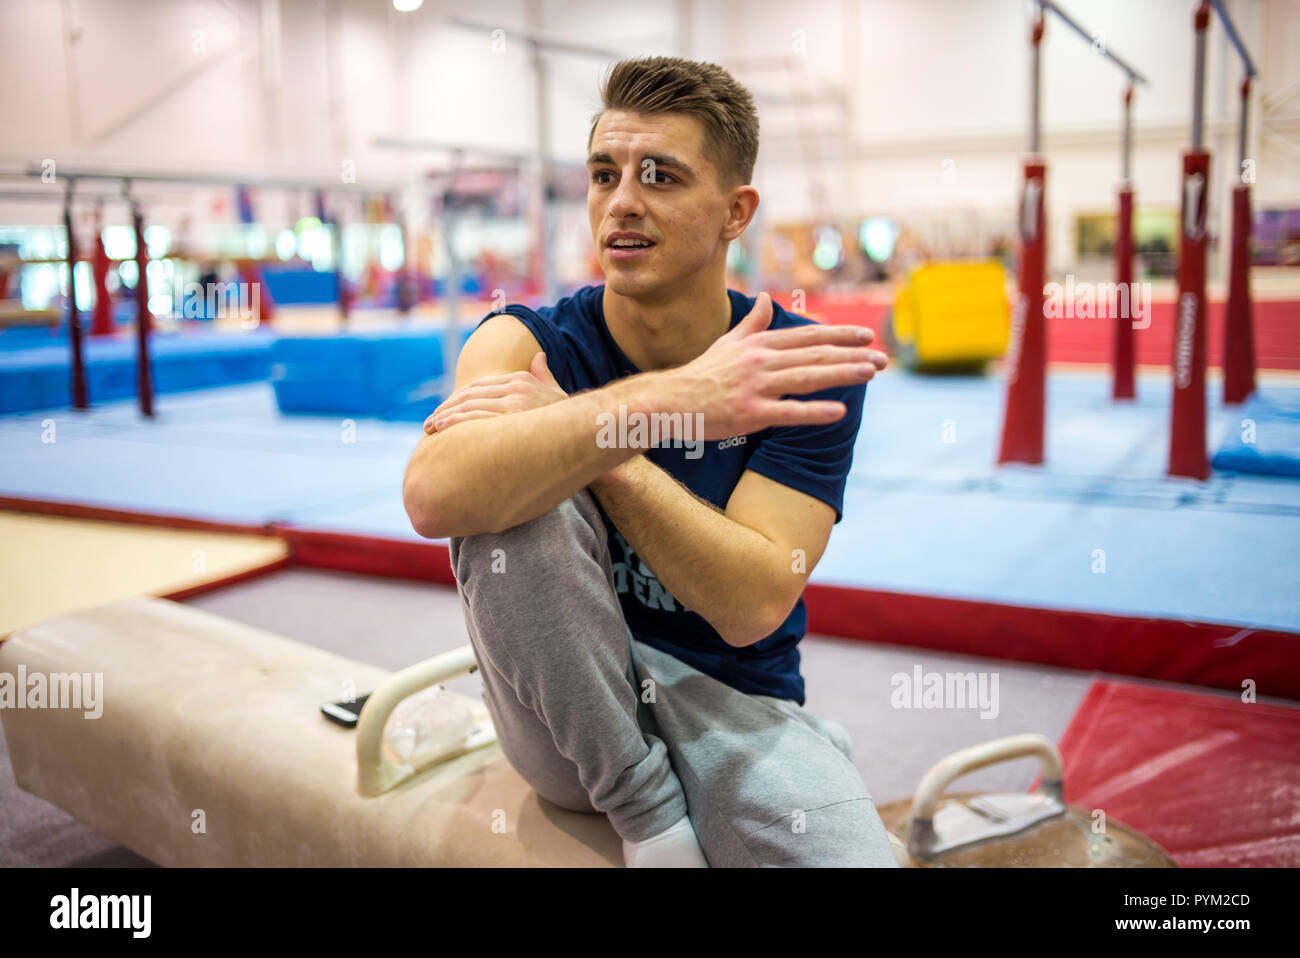 British Olympic Gold gymnast Max Whitlock at Basildon Sporting Centre for a piece to run ahead of the Commonwealth Games when he'll be one of the star Stock Photo